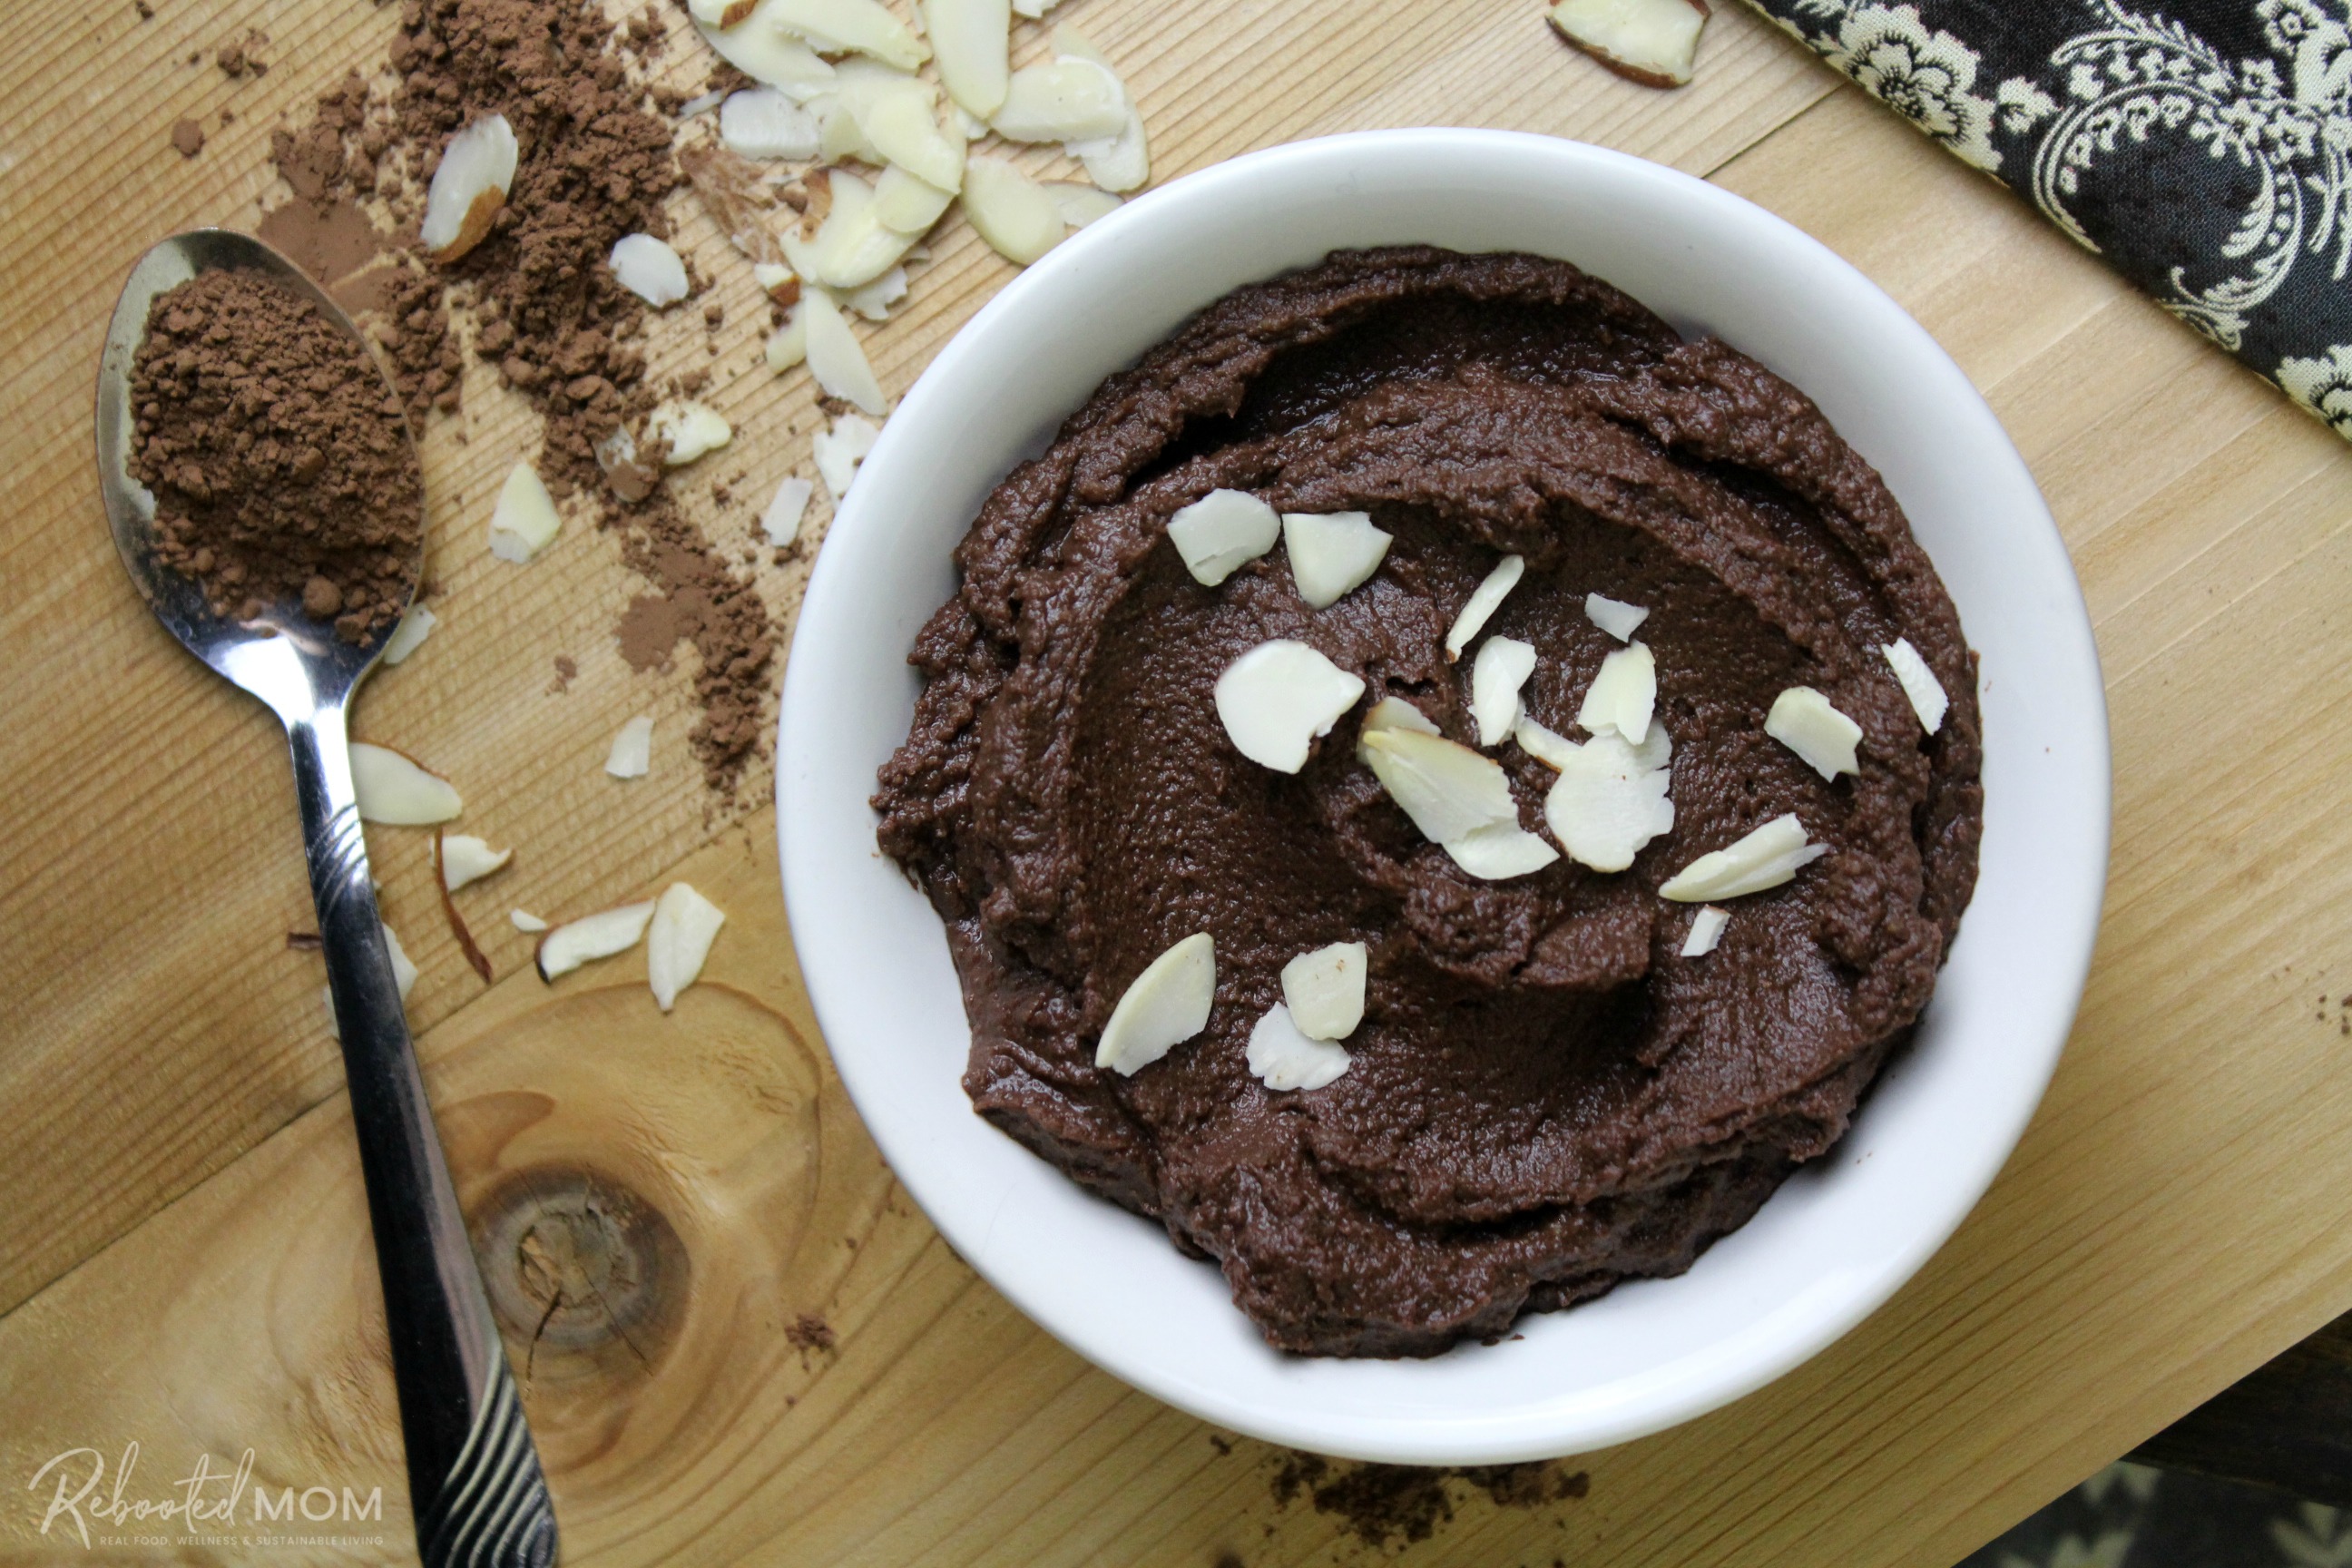 Our chocolate hummus recipe will satisfy any chocolate craving, and it's super healthy -- loaded with plenty of protein (and flavor, too!)